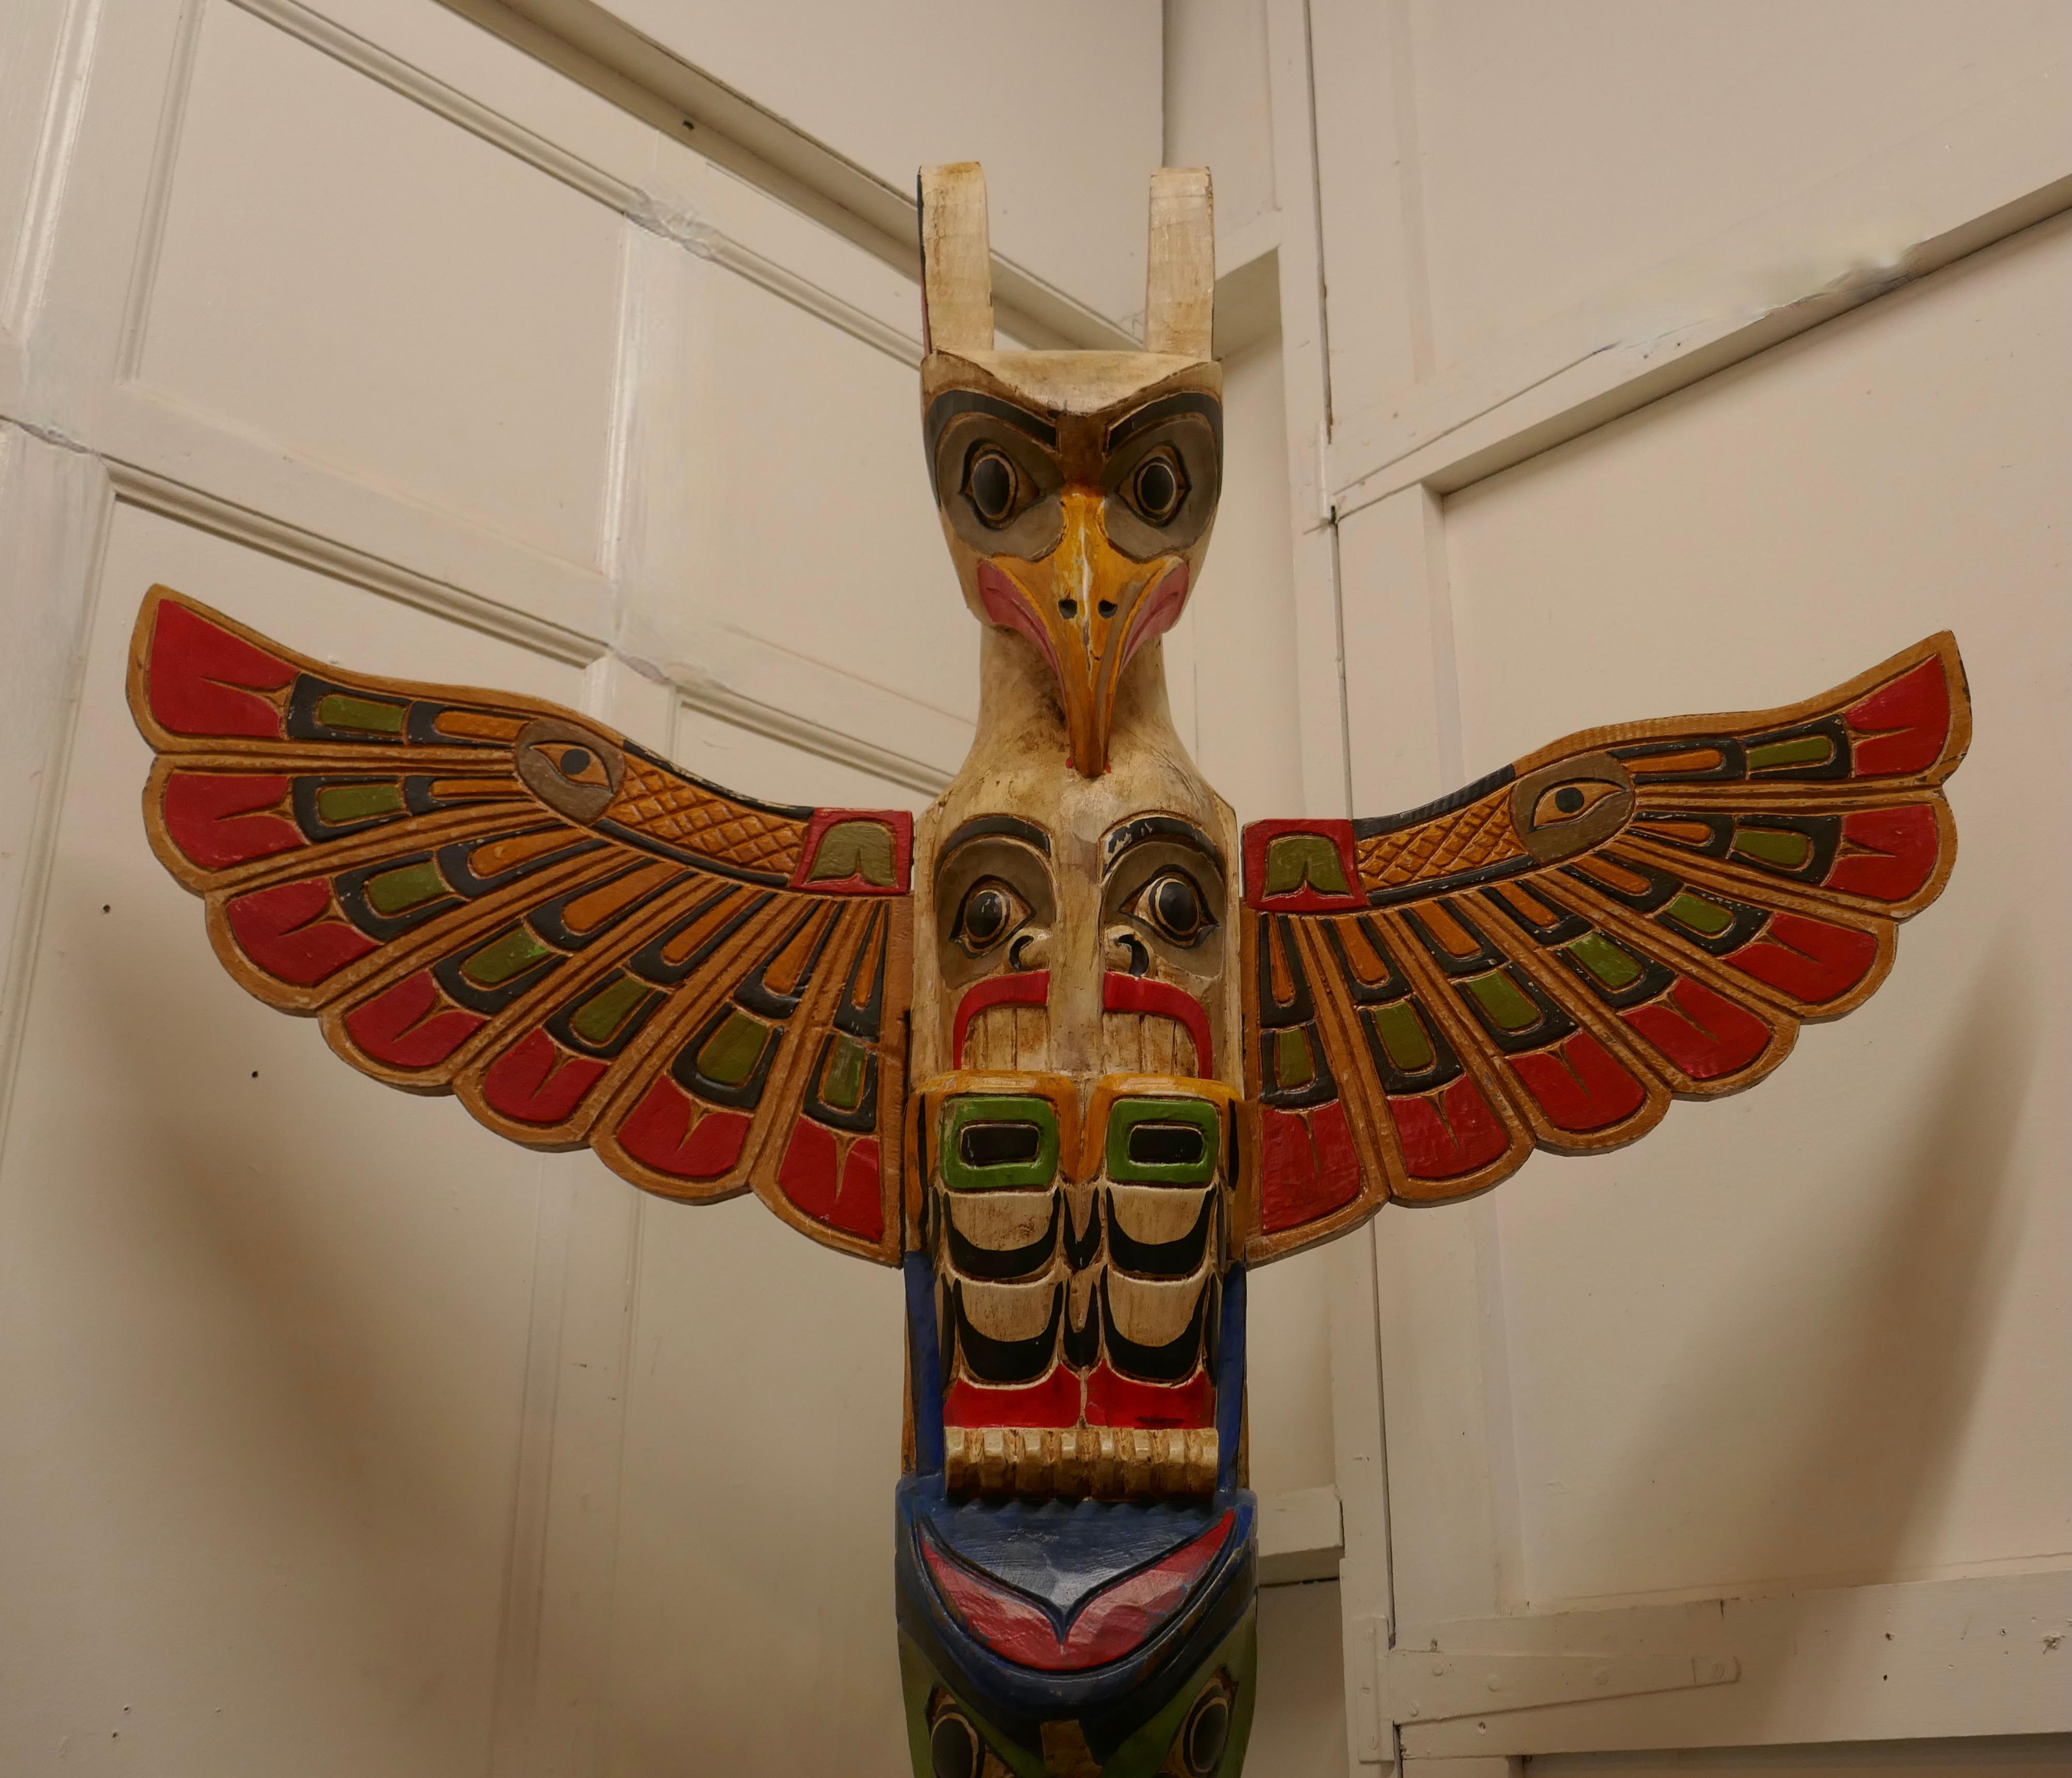 20th century Native American painted TOTEM pole

Over 6 feet tall a painted animal TOTEM. 
Animal totems are believed to have spiritual significance, watching over Pacific Northwest Indian tribes and families. 

This TOTEM features an eagle or